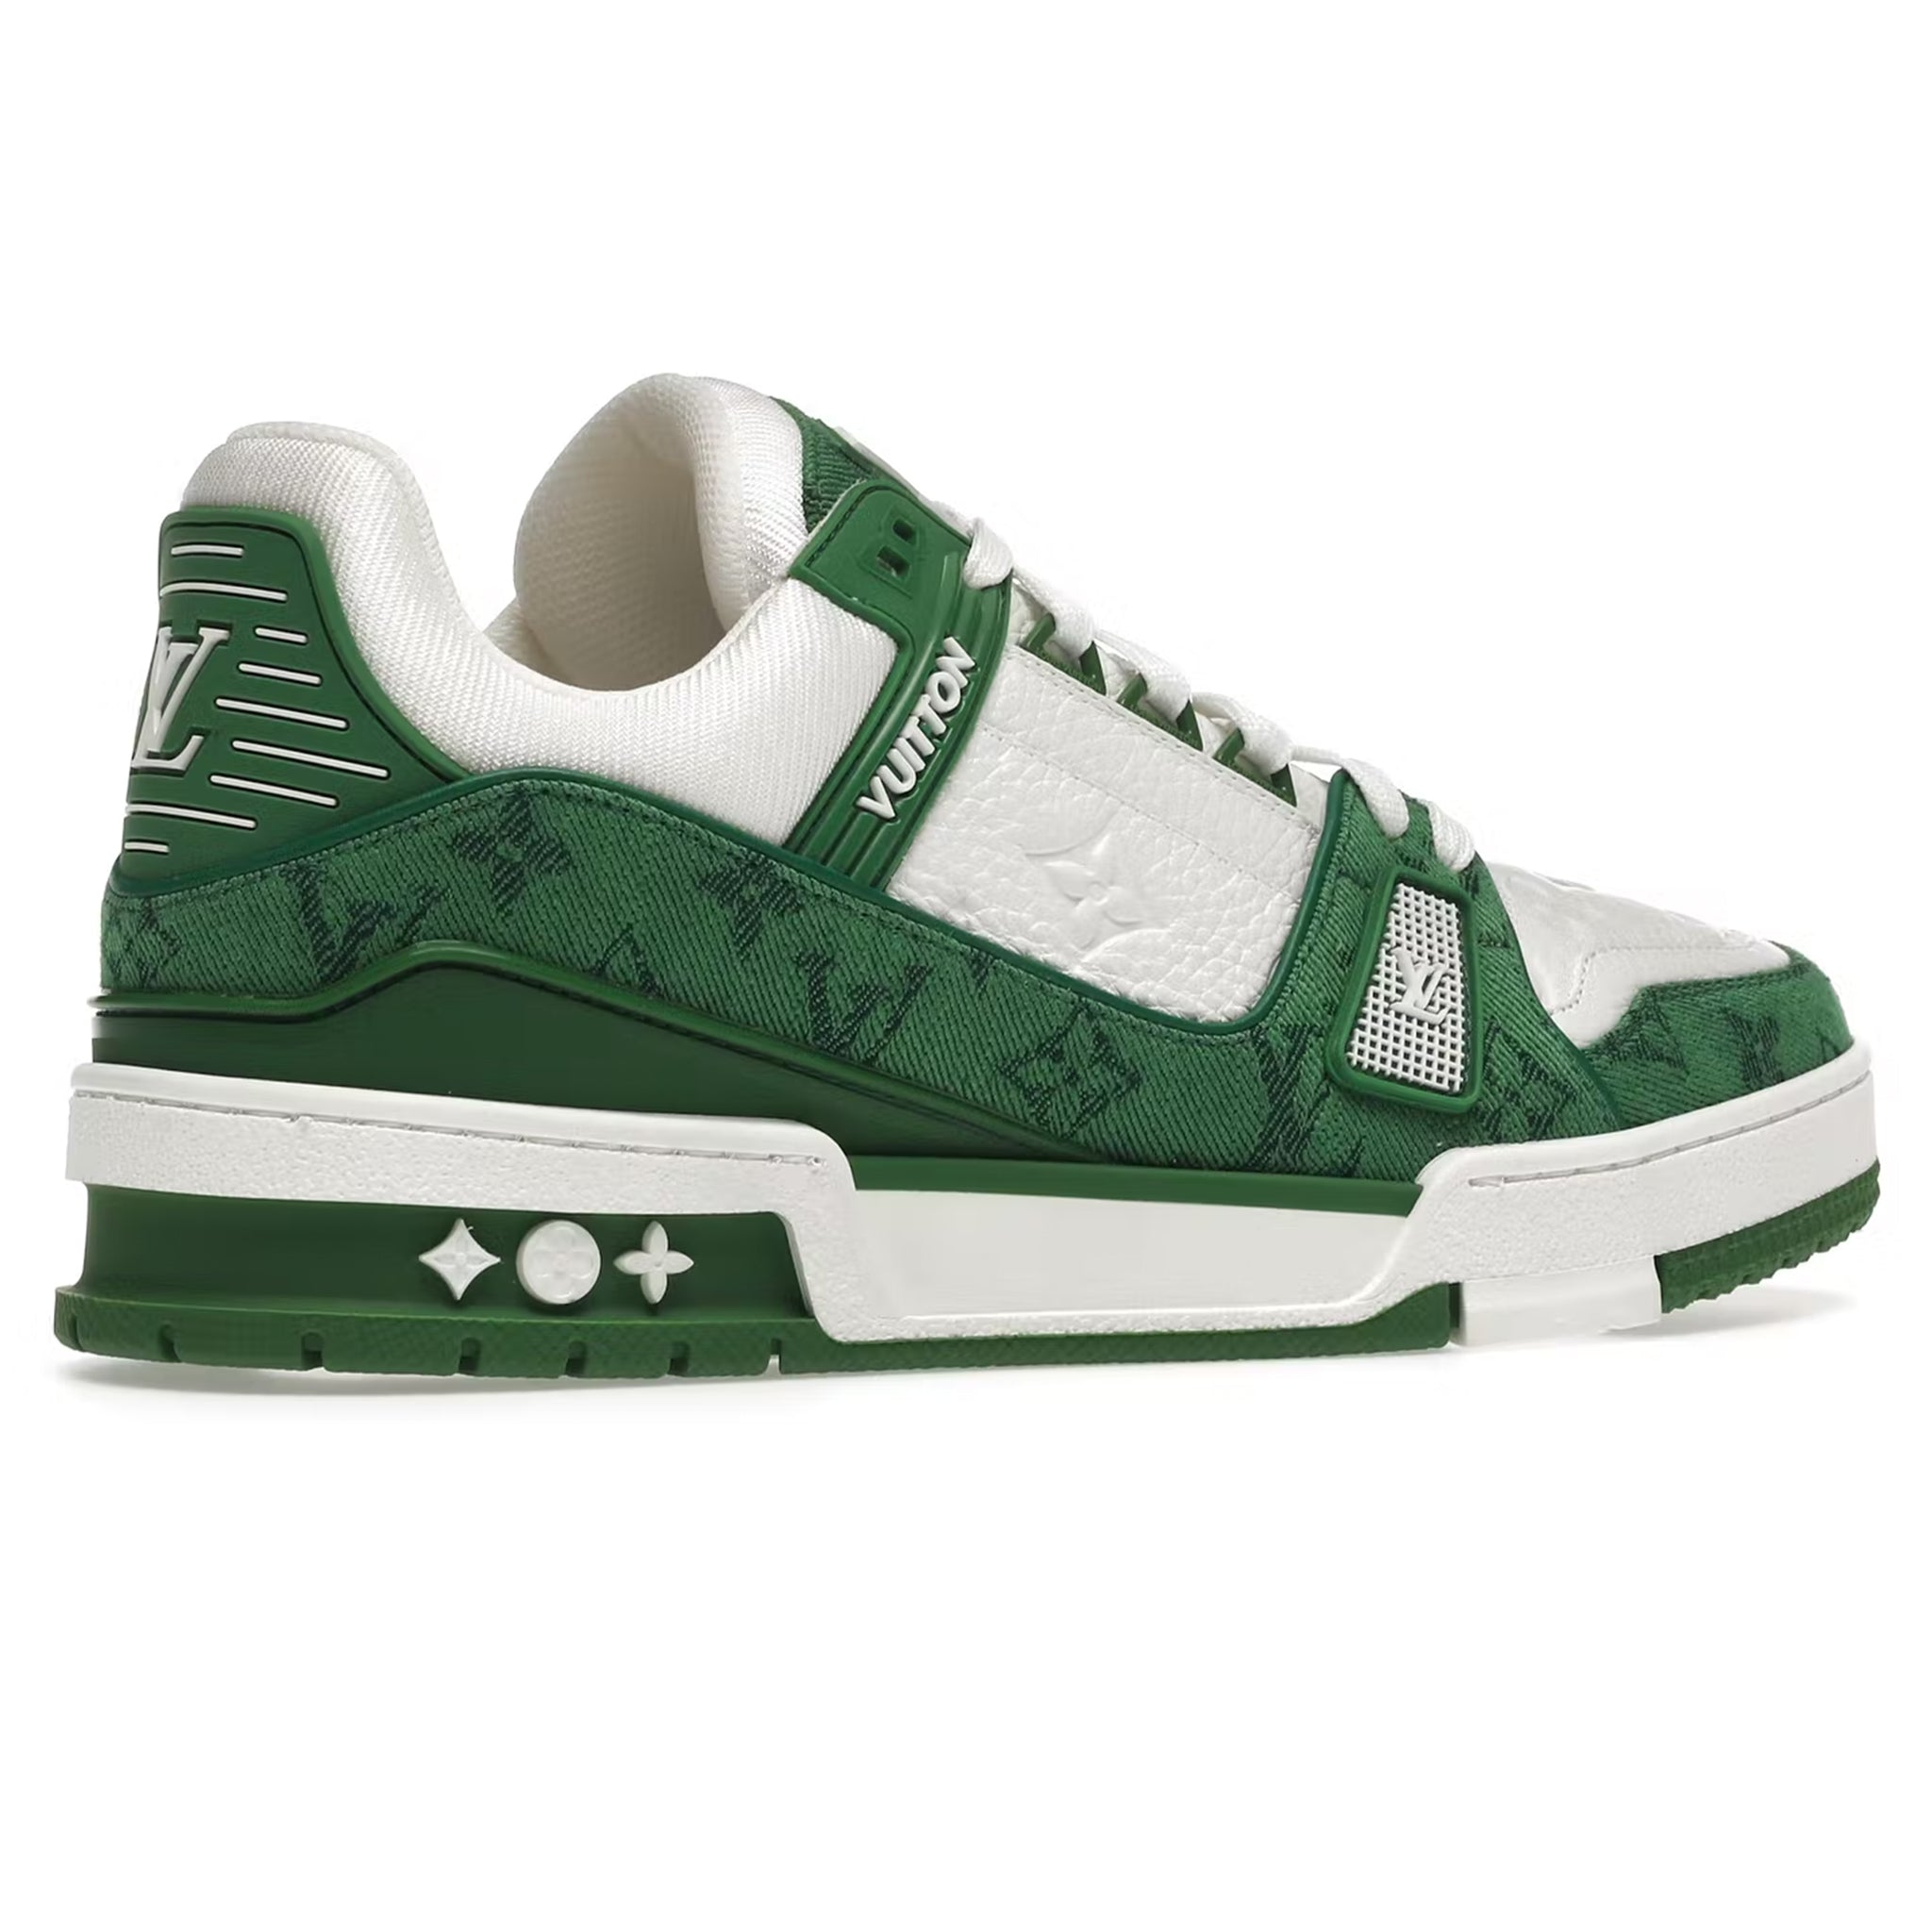 W2C] Are there any sub 400y batch of the OG LV trainers (green